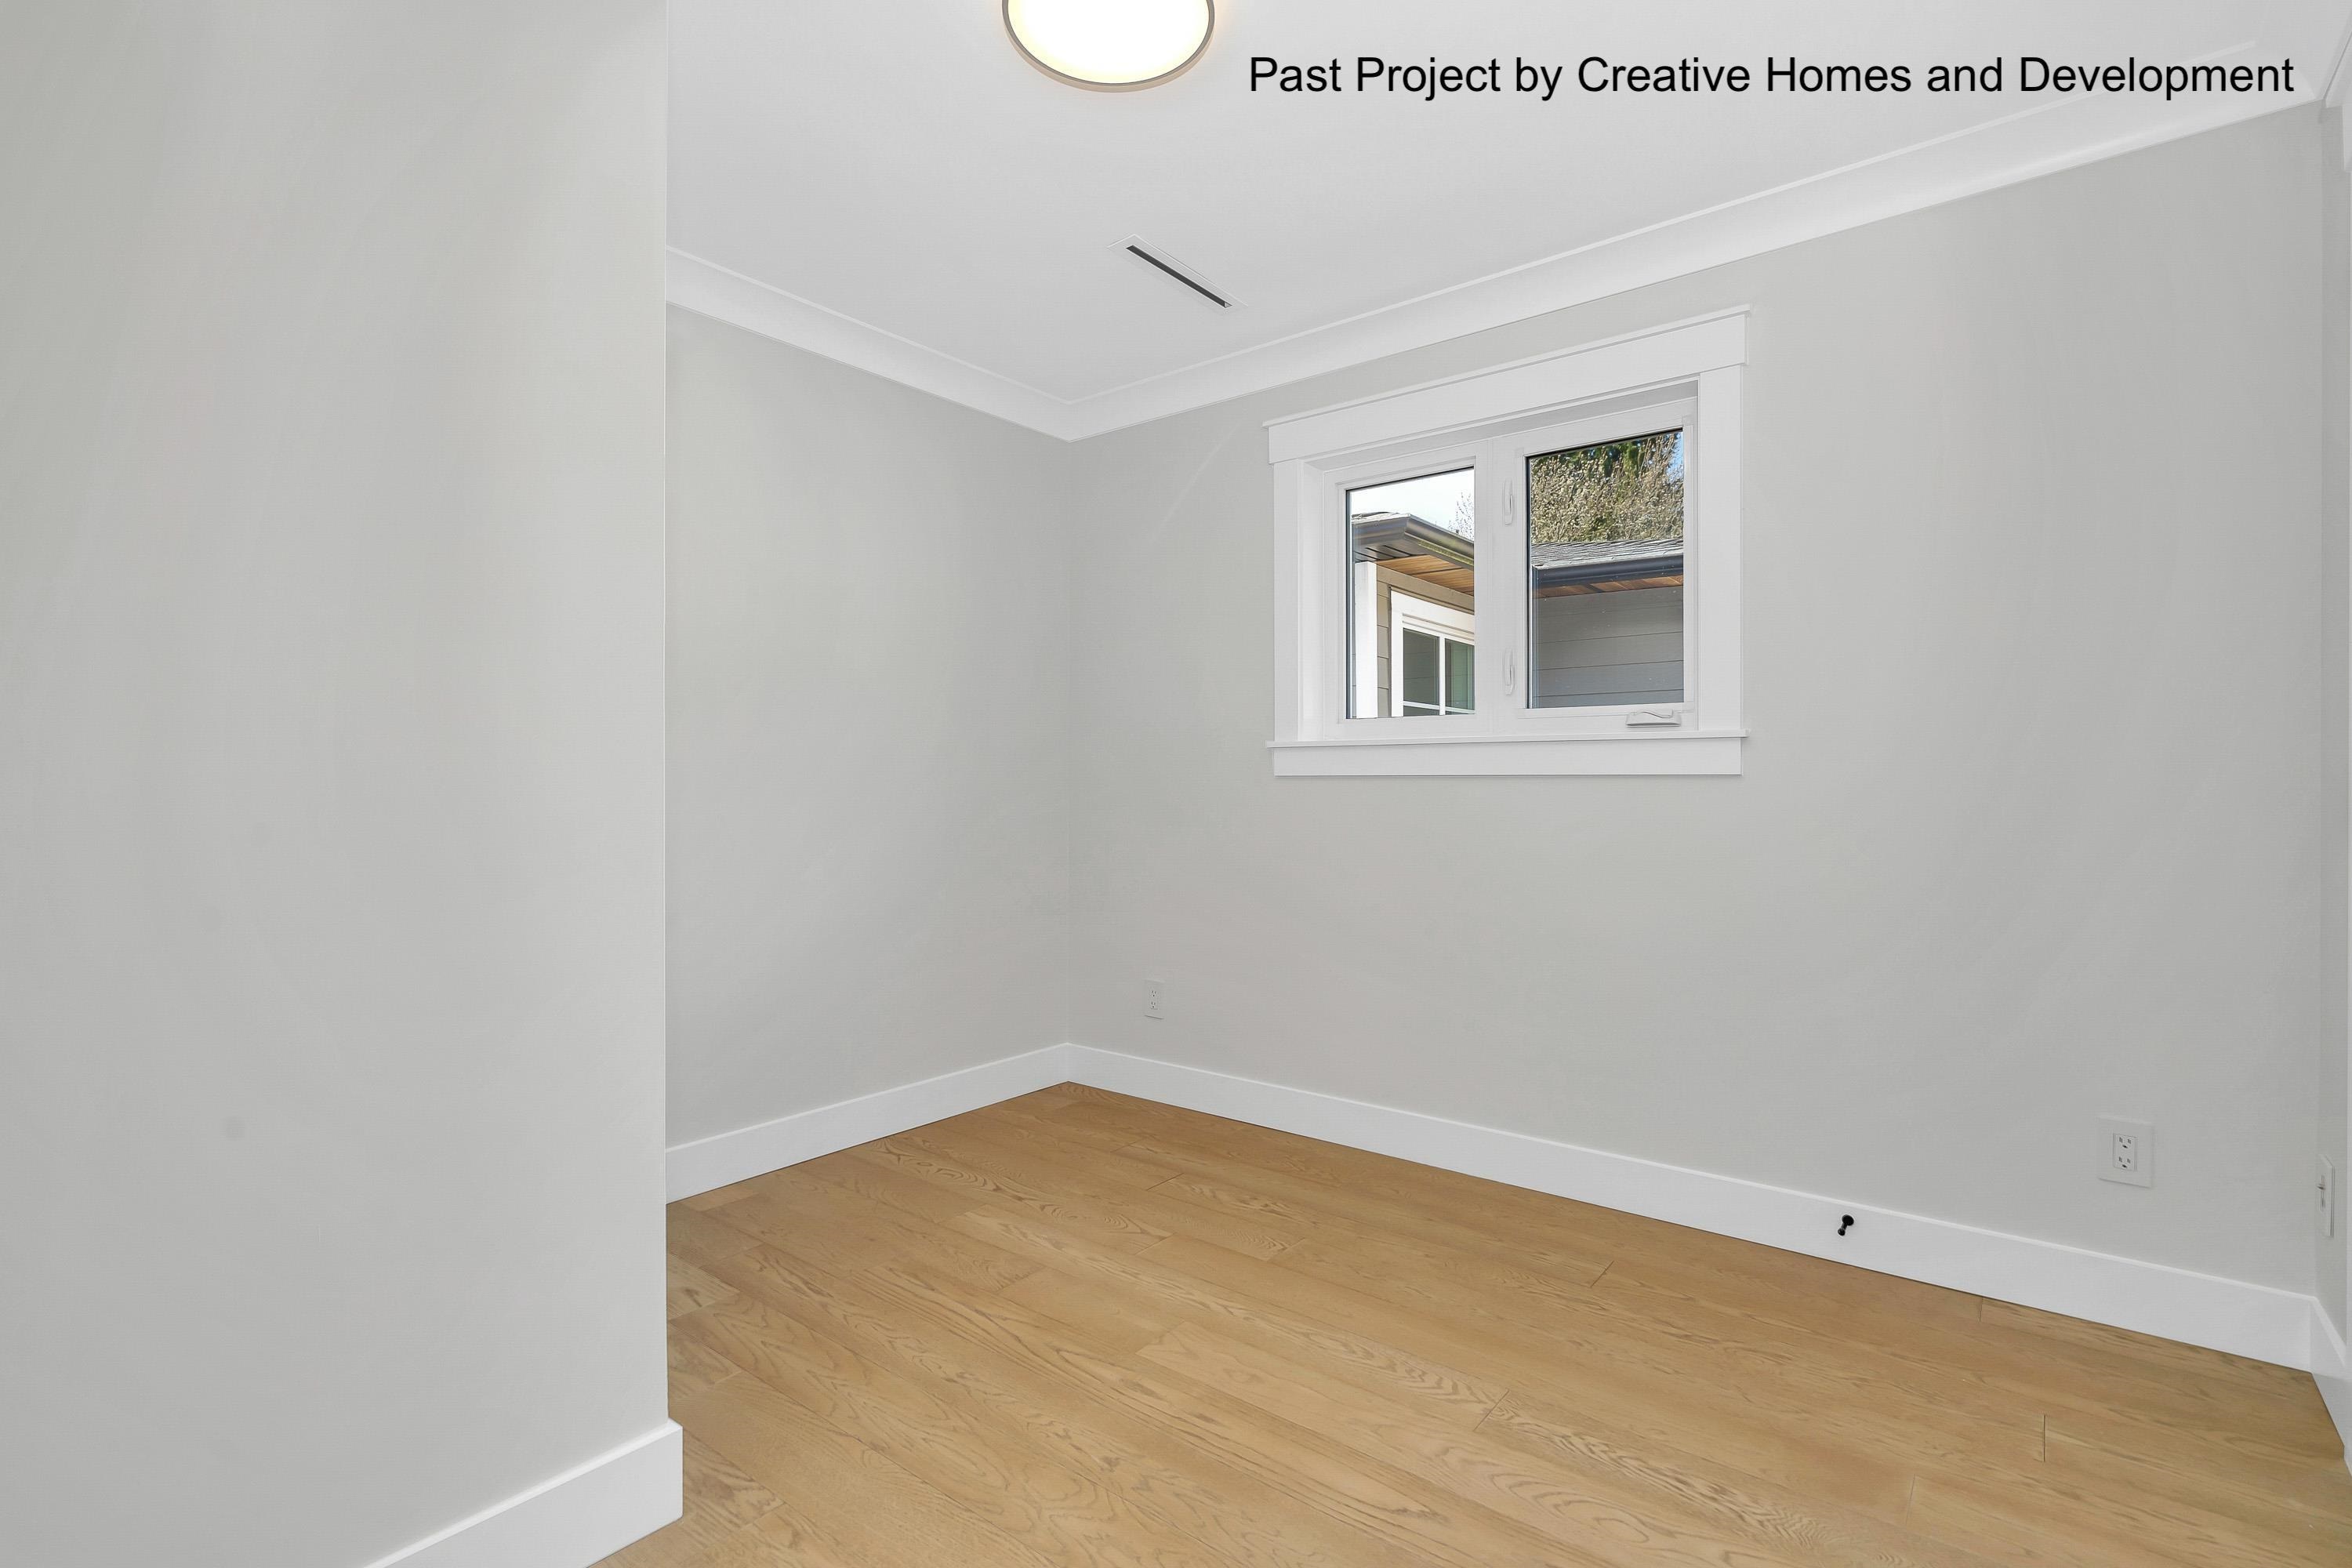 Listing image of 3031 FROMME ROAD